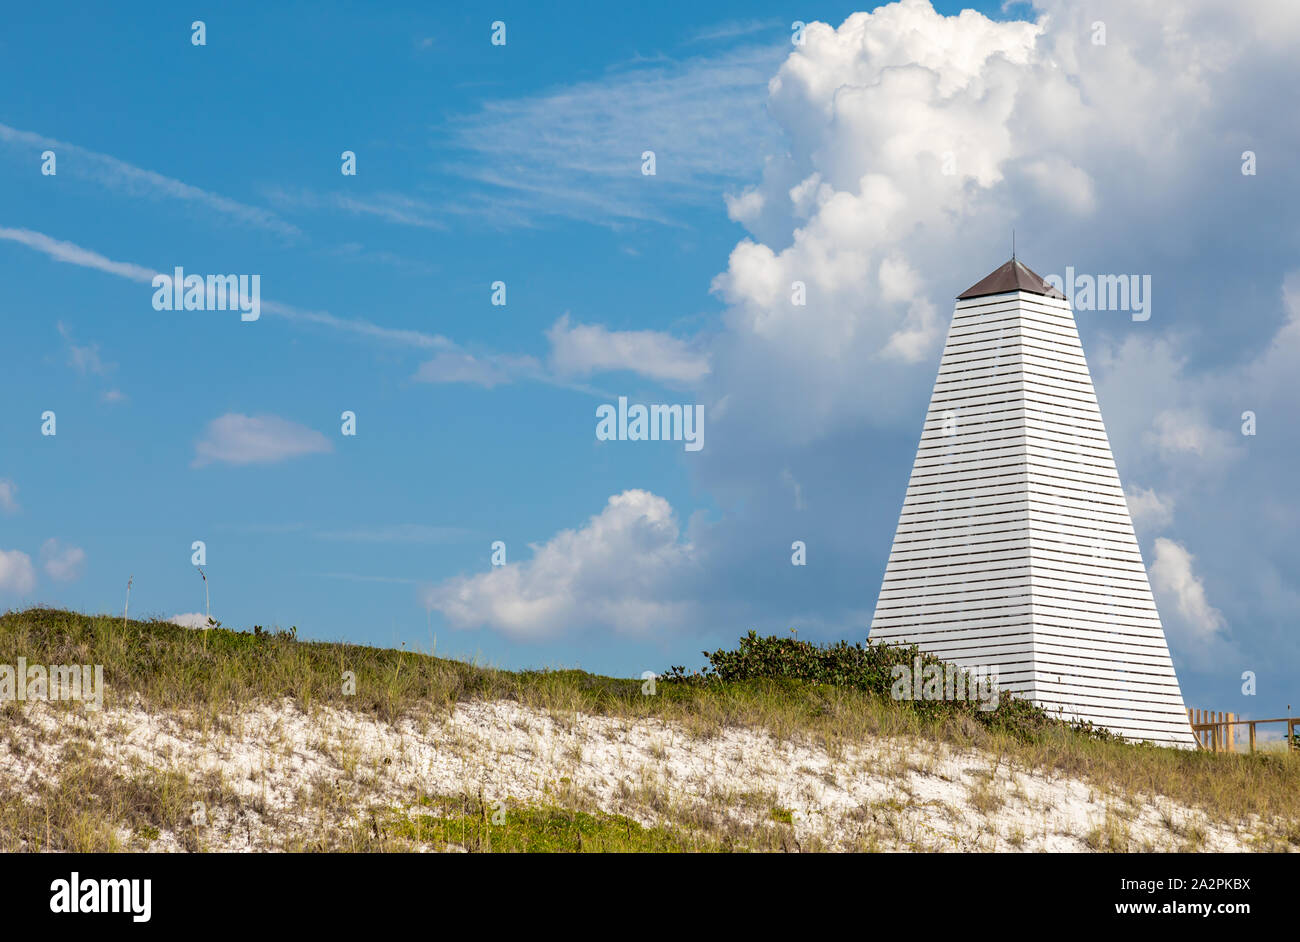 A beach side land mark structure in Seaside, Fl Stock Photo